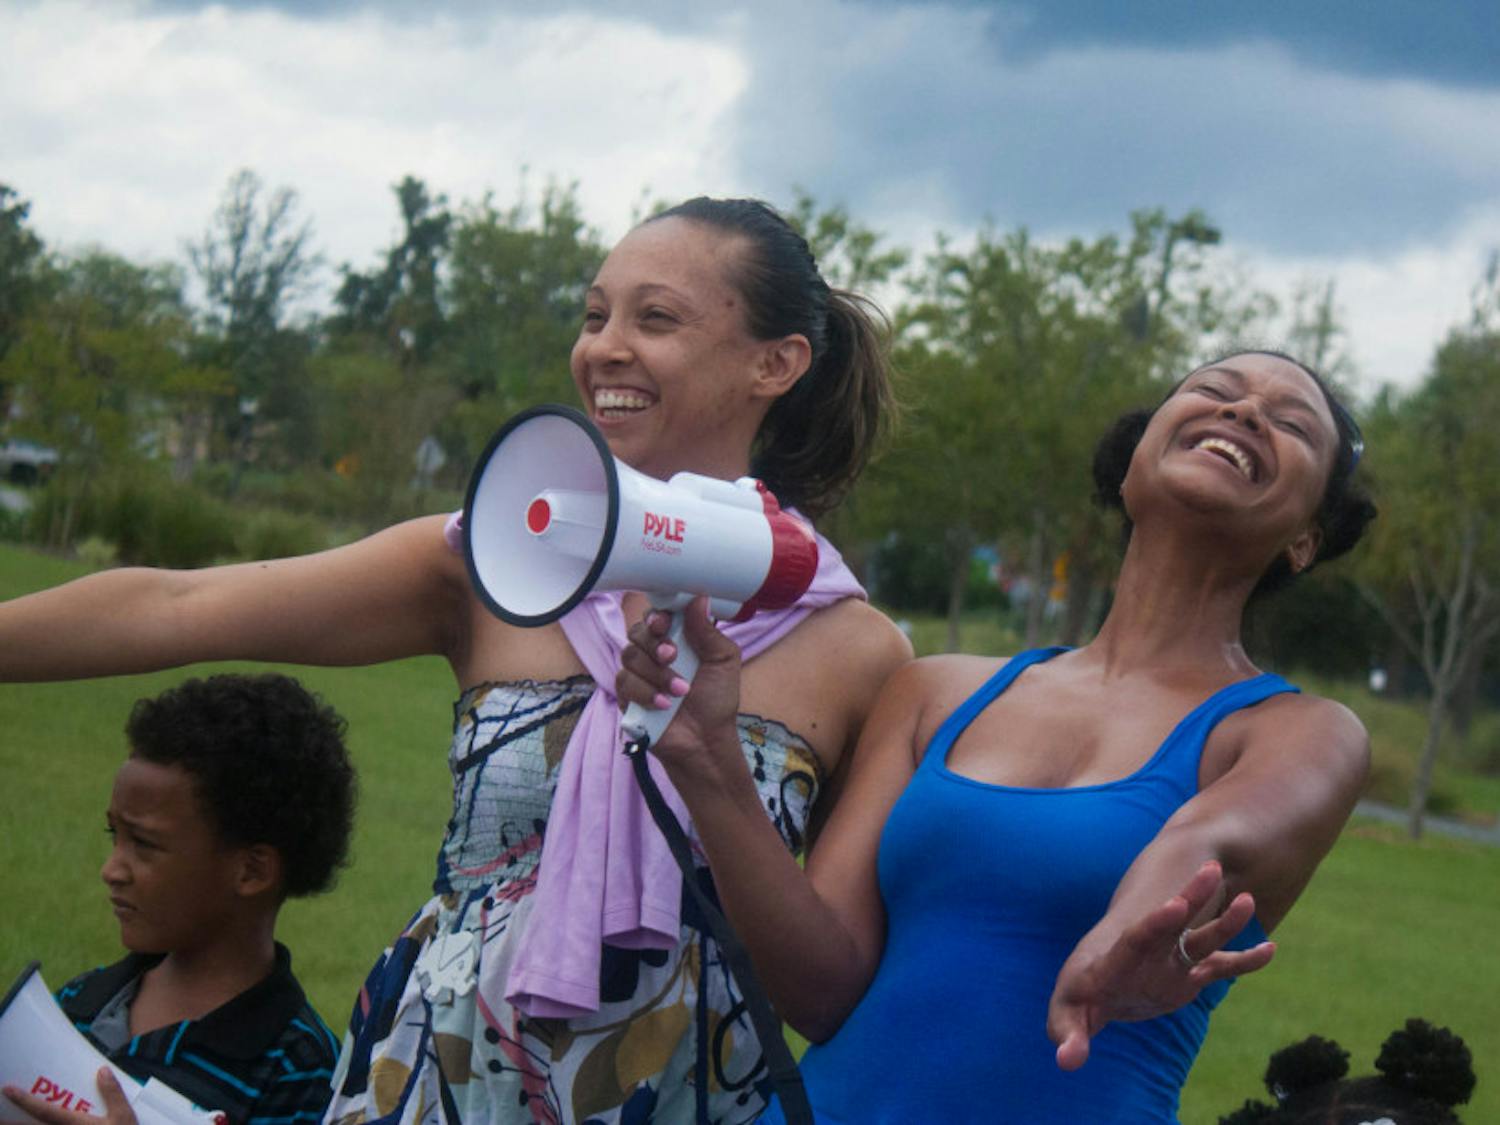 Friends Keisha Roberts and Staci Bertrand participated in the competition for the best “save the elephant and rhino” chant or song. Together, they sang their protest song as their children joined them.